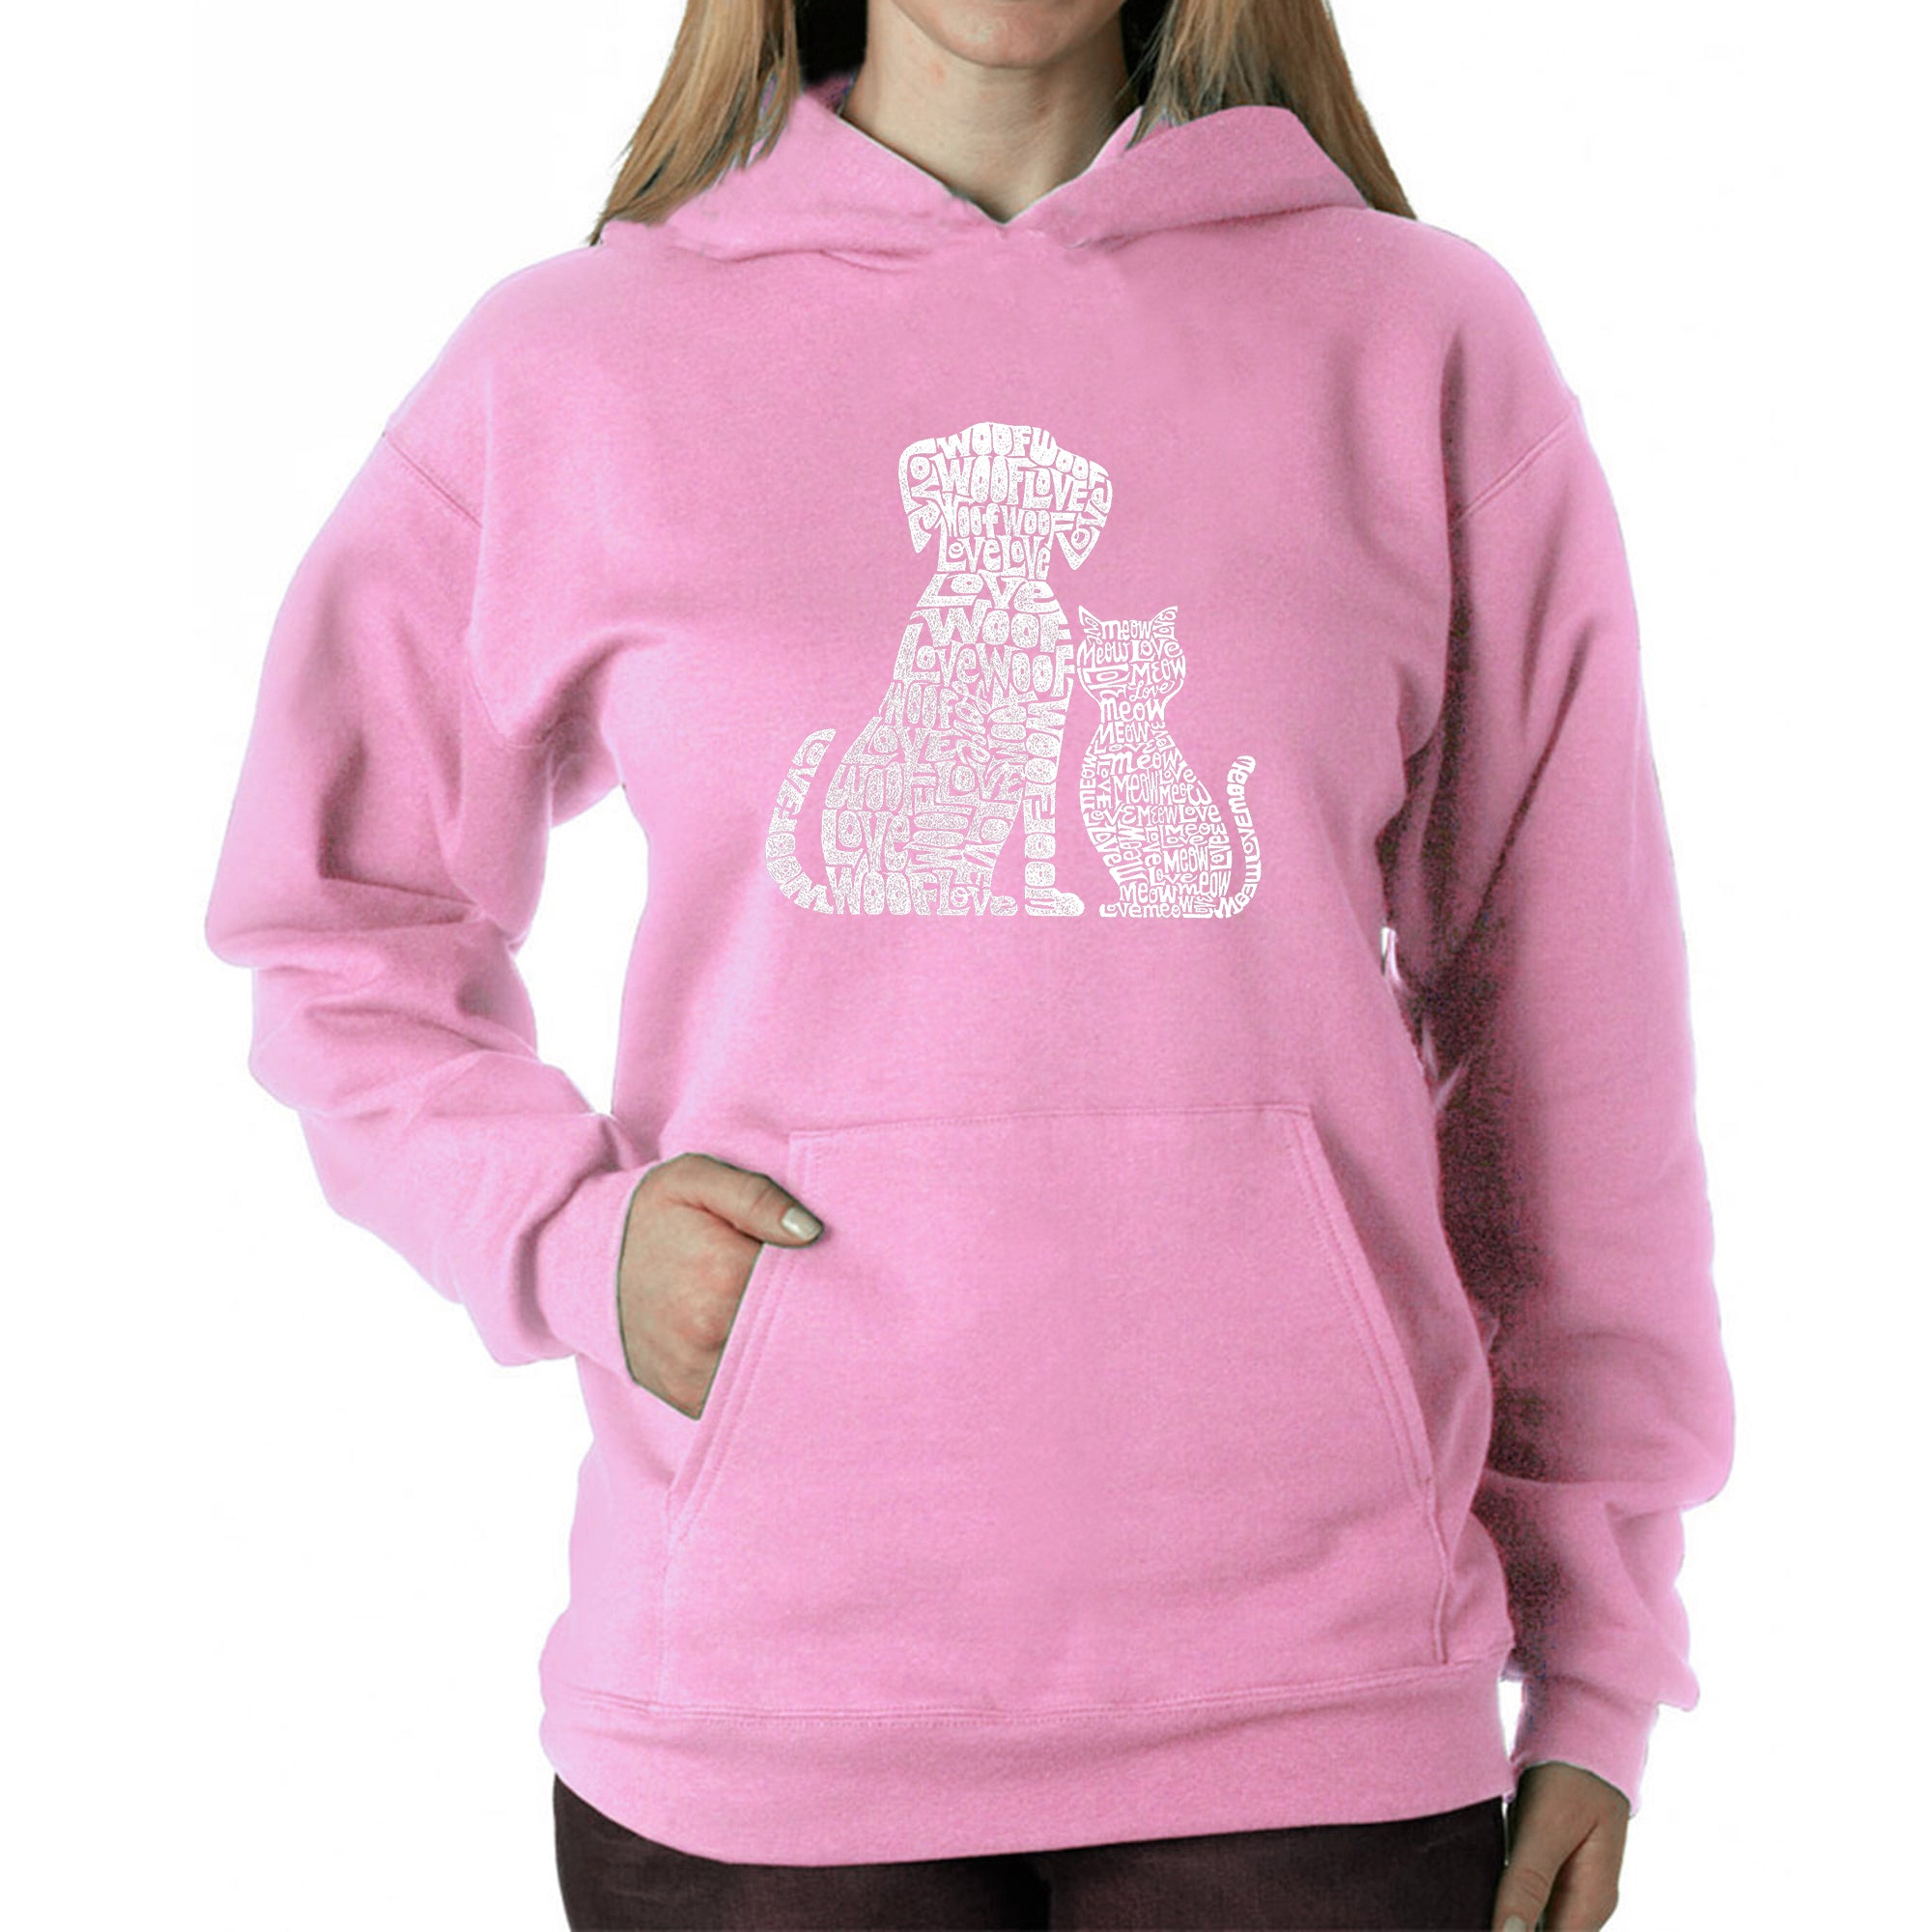 Dogs And Cats - Women's Word Art Hooded Sweatshirt - Black - XXXX-Large